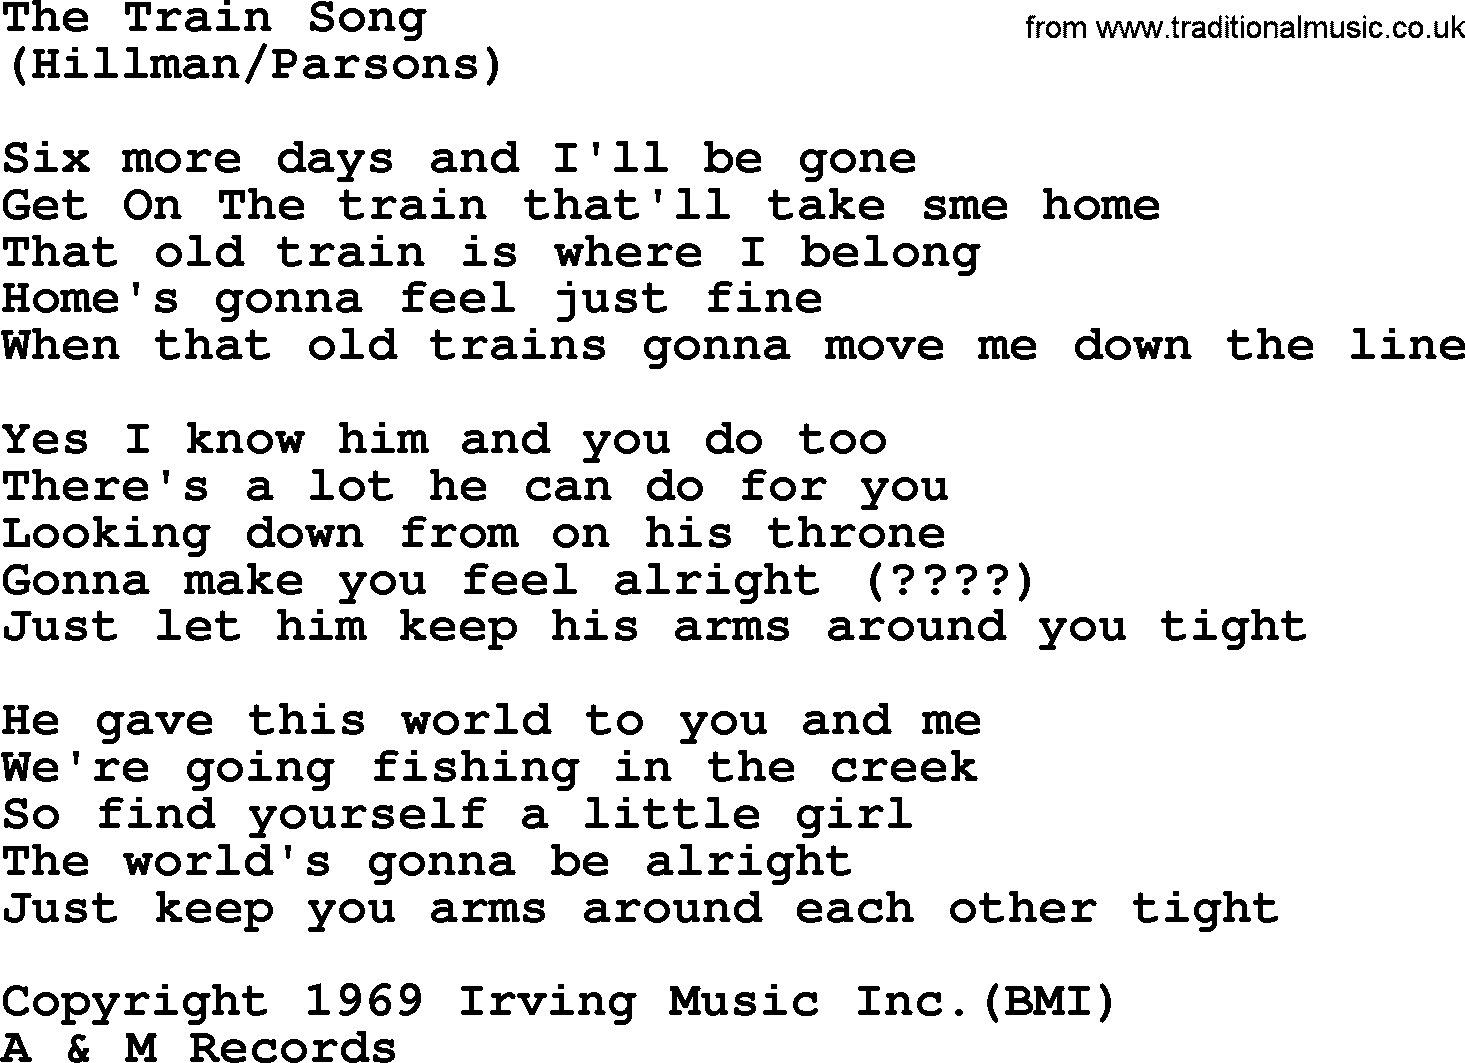 The Byrds song The Train Song, lyrics